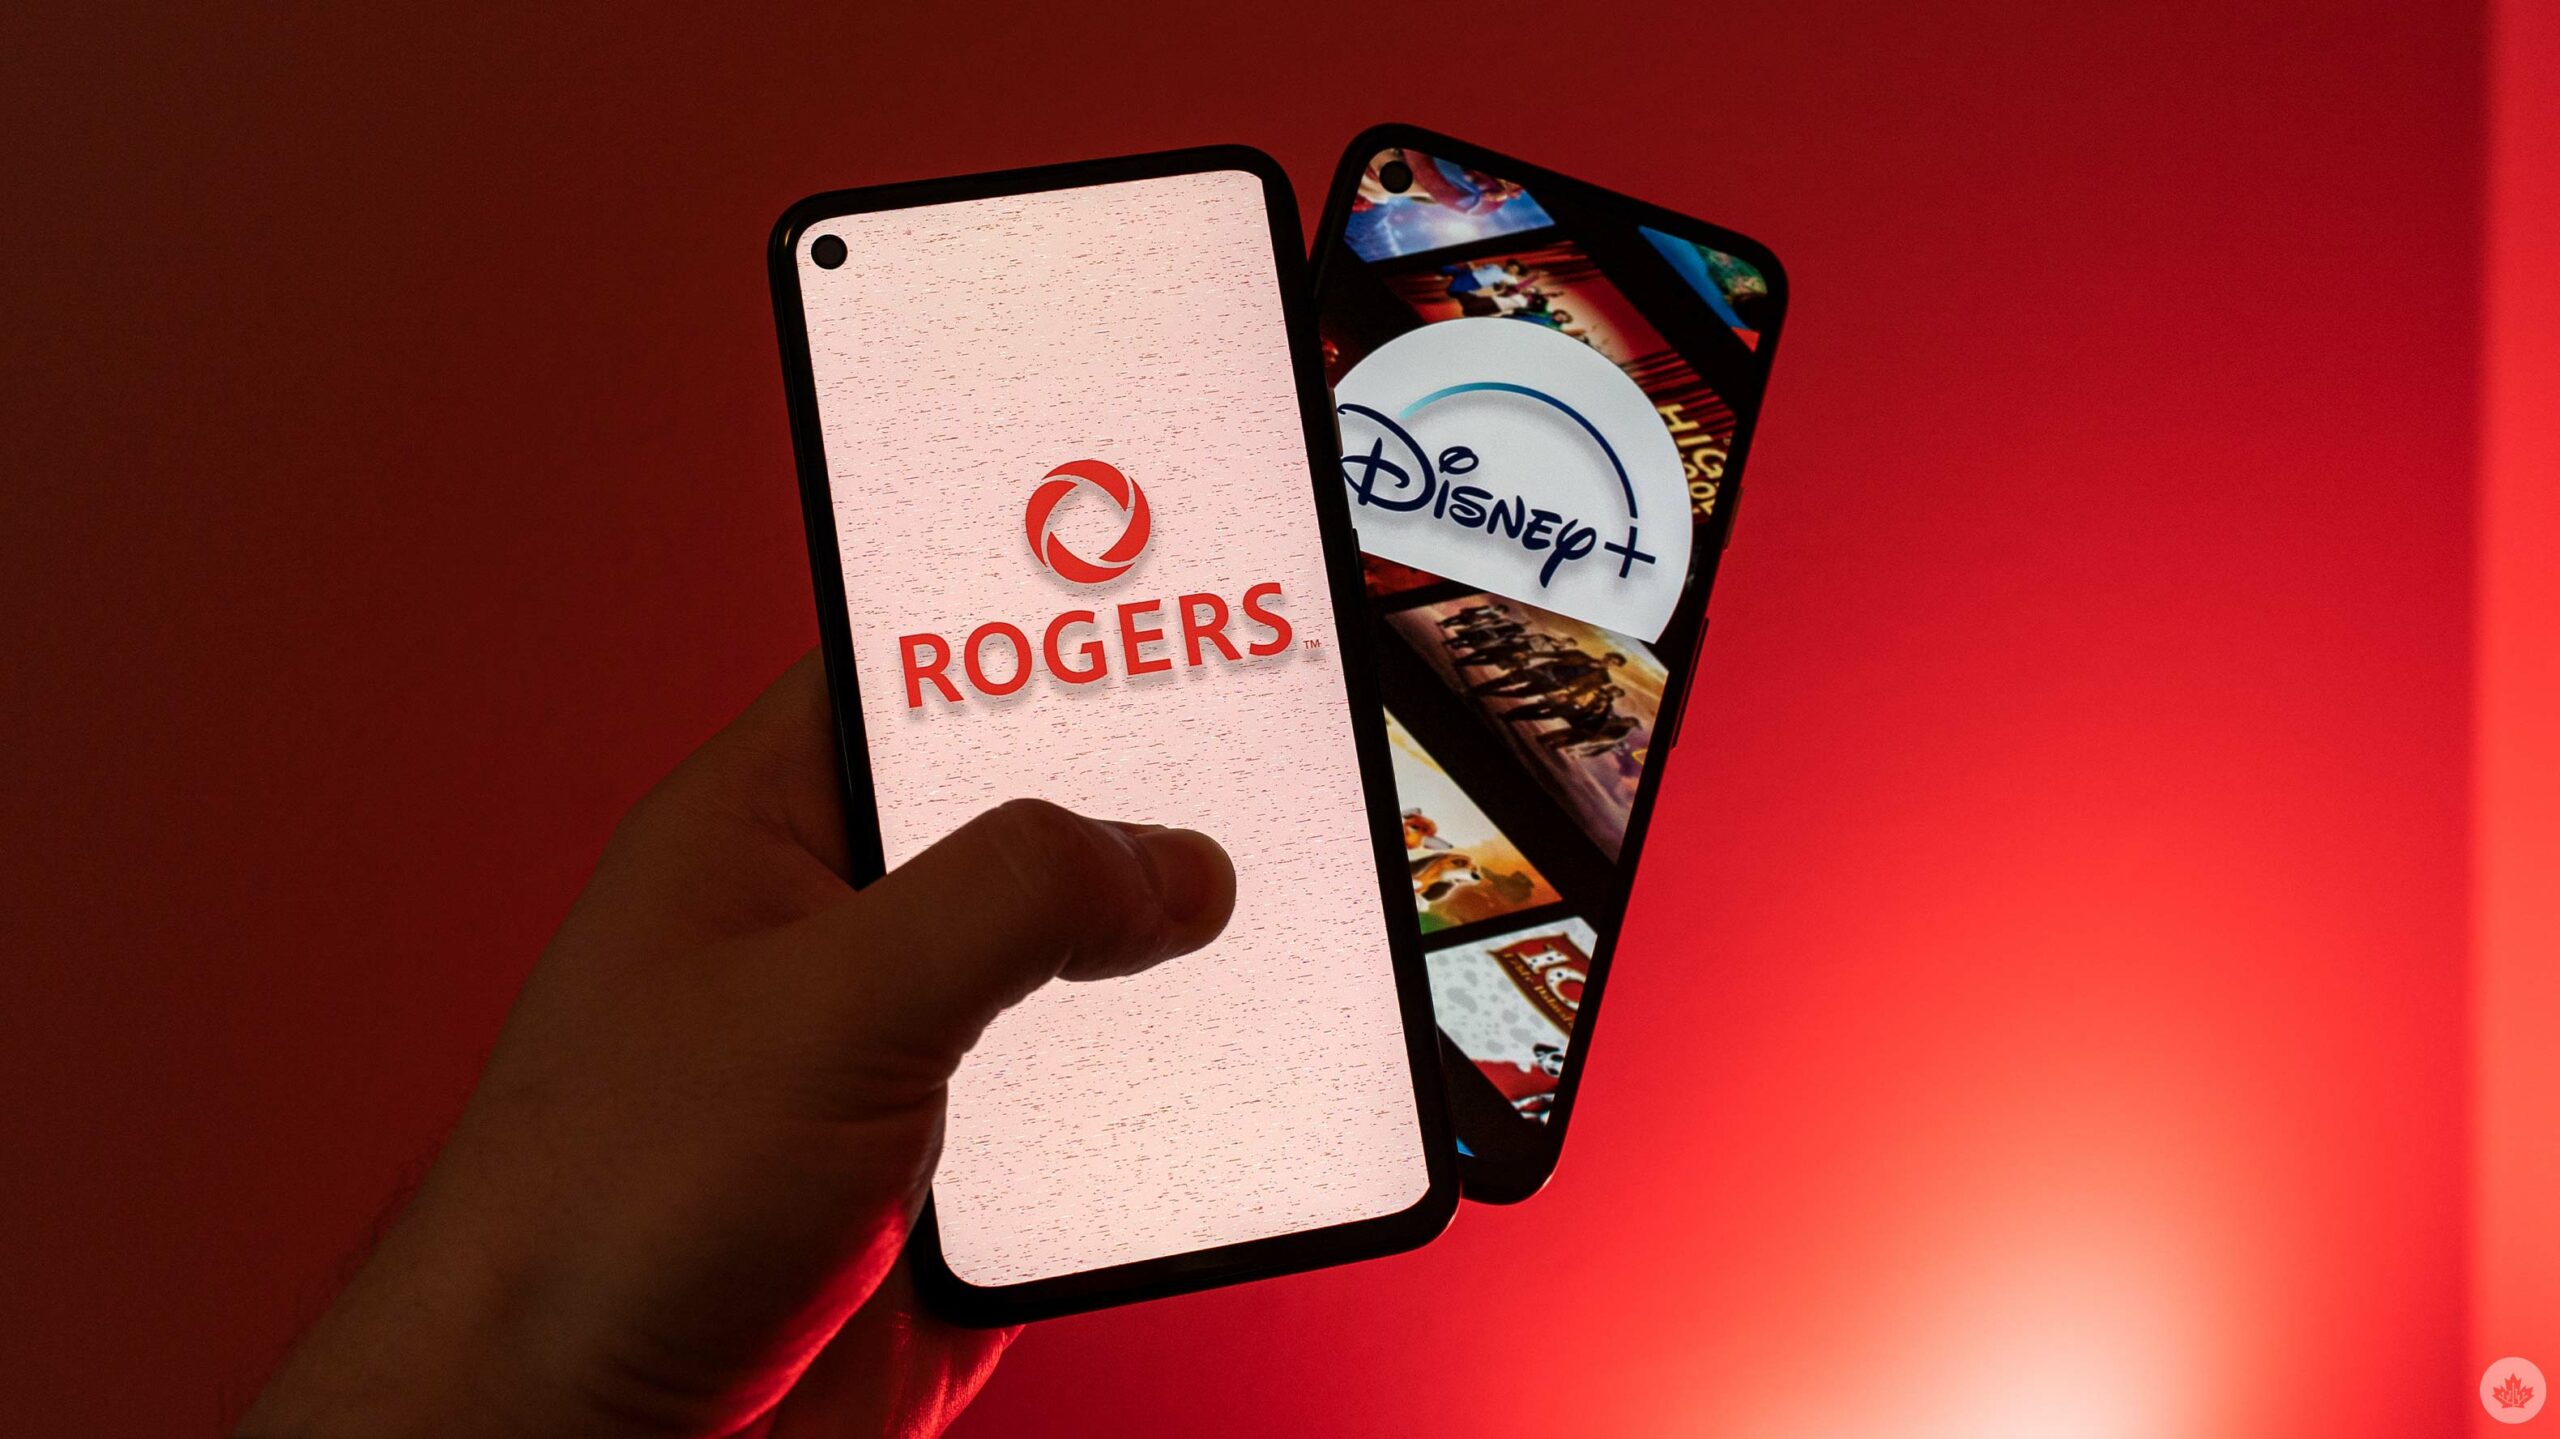 Rogers and Disney+ logos